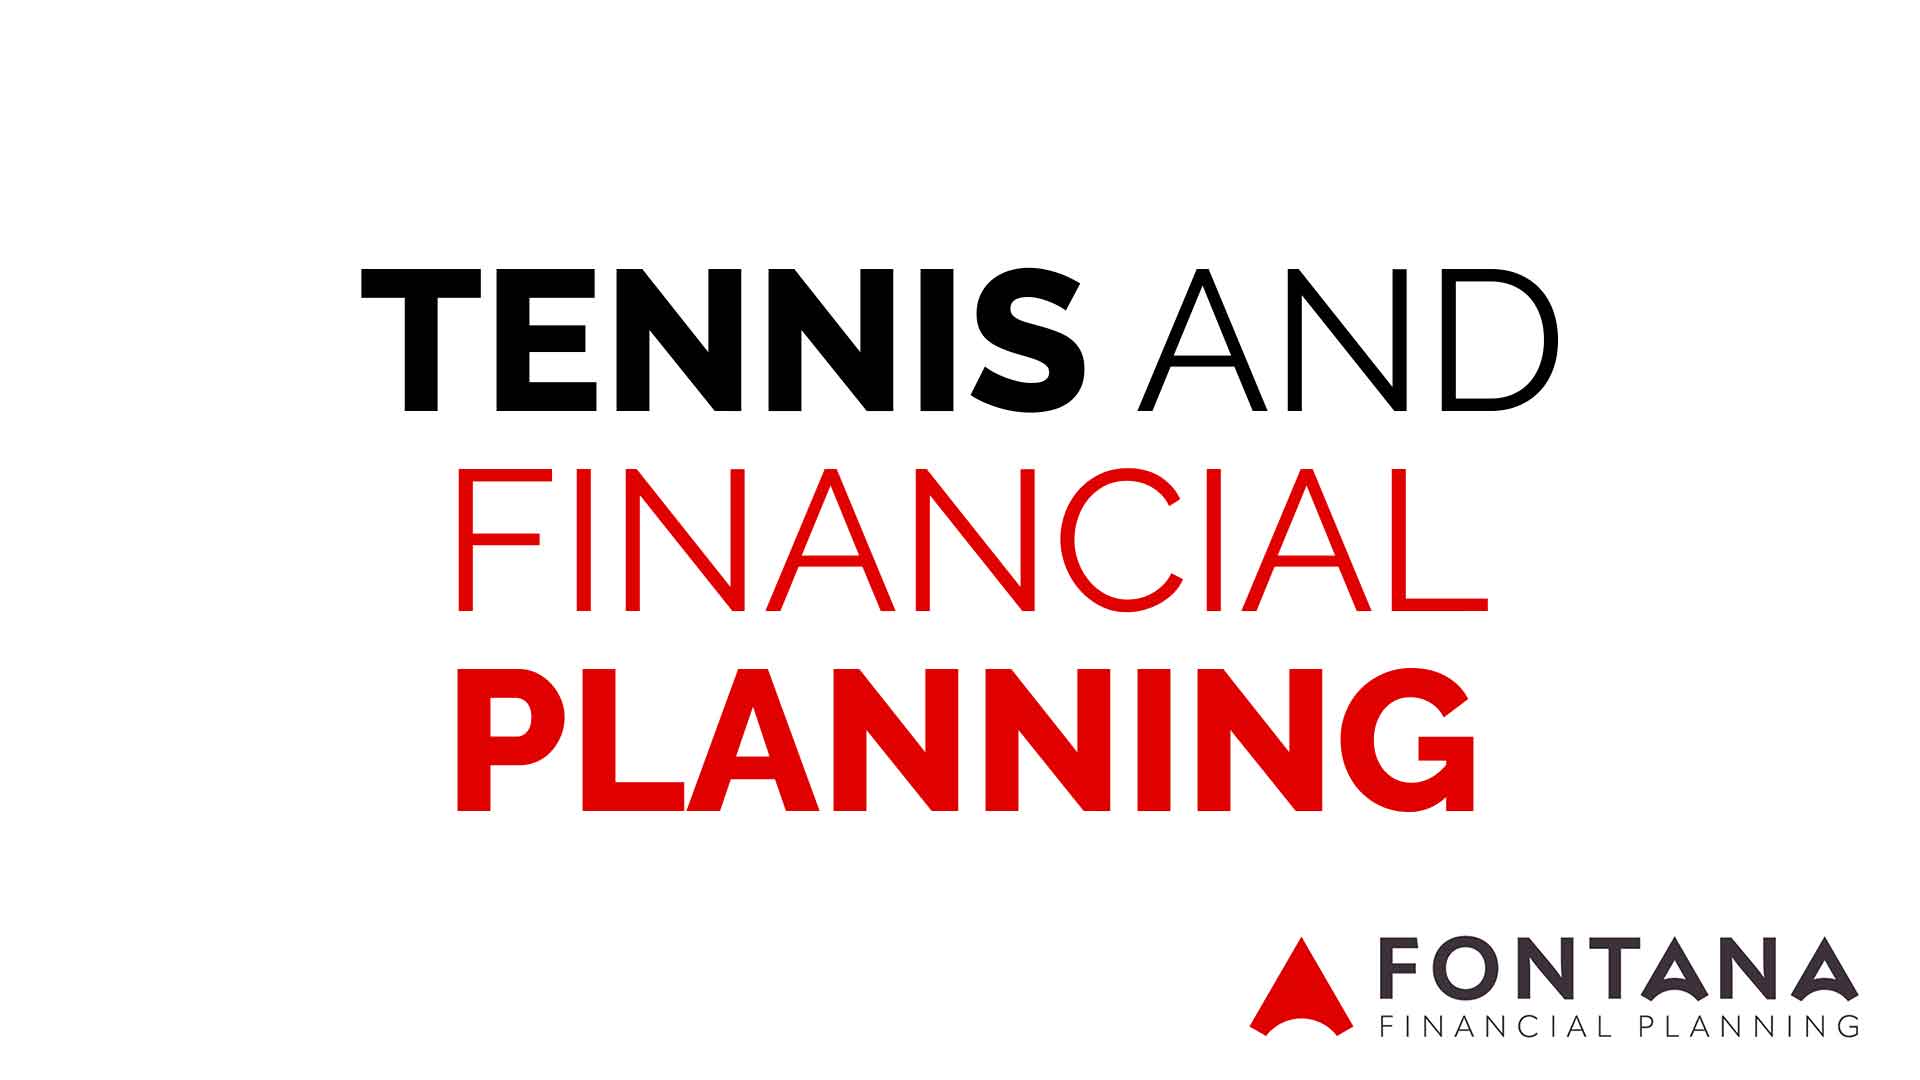 Tennis and Financial Planning